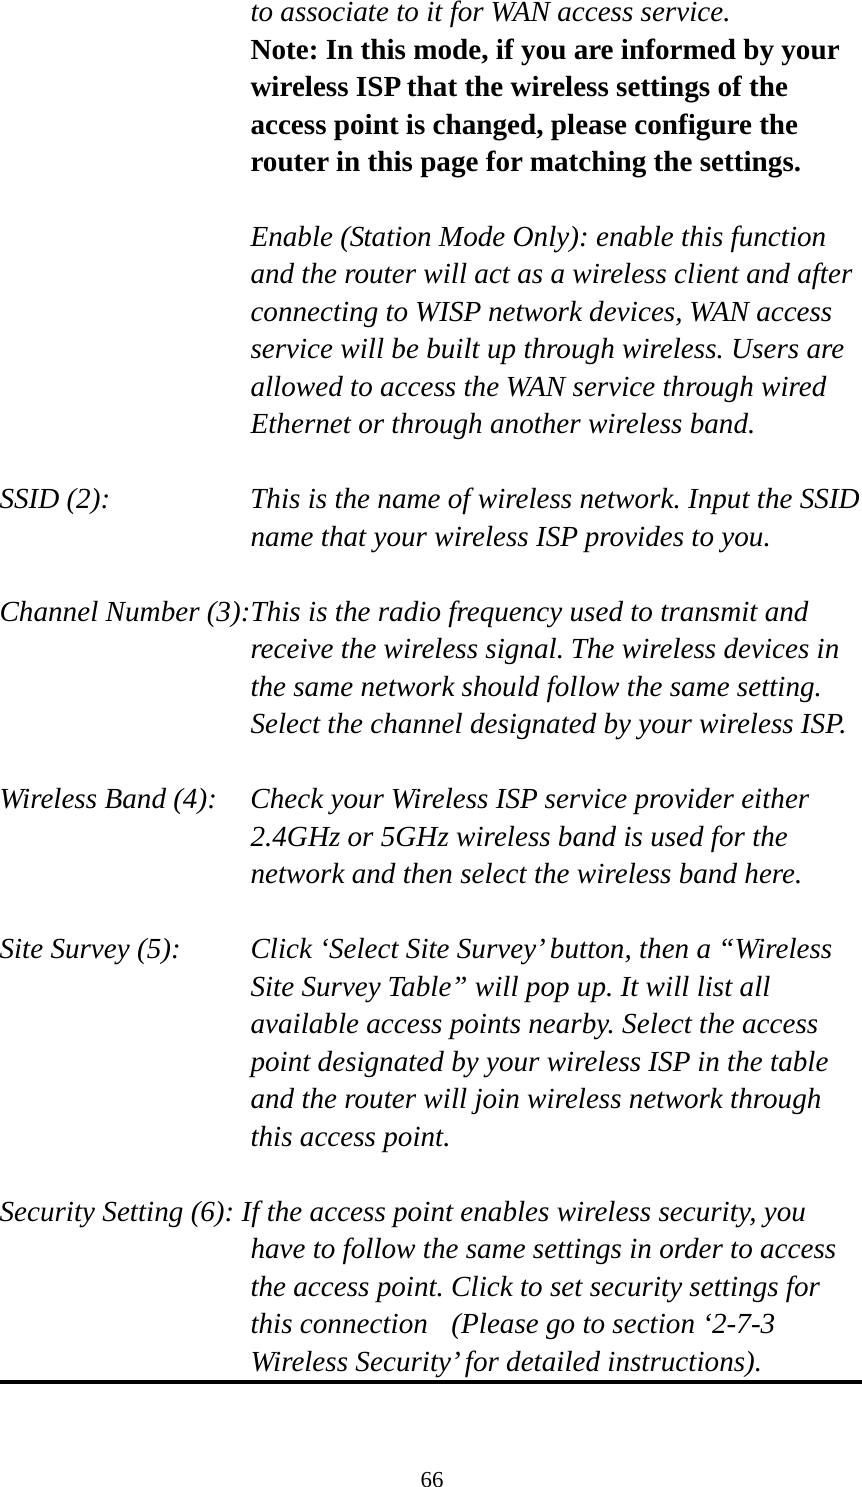 66 to associate to it for WAN access service. Note: In this mode, if you are informed by your wireless ISP that the wireless settings of the access point is changed, please configure the router in this page for matching the settings.  Enable (Station Mode Only): enable this function and the router will act as a wireless client and after connecting to WISP network devices, WAN access service will be built up through wireless. Users are allowed to access the WAN service through wired Ethernet or through another wireless band.  SSID (2):    This is the name of wireless network. Input the SSID name that your wireless ISP provides to you.  Channel Number (3):This is the radio frequency used to transmit and receive the wireless signal. The wireless devices in the same network should follow the same setting. Select the channel designated by your wireless ISP.  Wireless Band (4):    Check your Wireless ISP service provider either 2.4GHz or 5GHz wireless band is used for the network and then select the wireless band here.  Site Survey (5):    Click ‘Select Site Survey’ button, then a “Wireless Site Survey Table” will pop up. It will list all available access points nearby. Select the access point designated by your wireless ISP in the table and the router will join wireless network through this access point.  Security Setting (6): If the access point enables wireless security, you have to follow the same settings in order to access the access point. Click to set security settings for this connection  (Please go to section ‘2-7-3 Wireless Security’ for detailed instructions).  